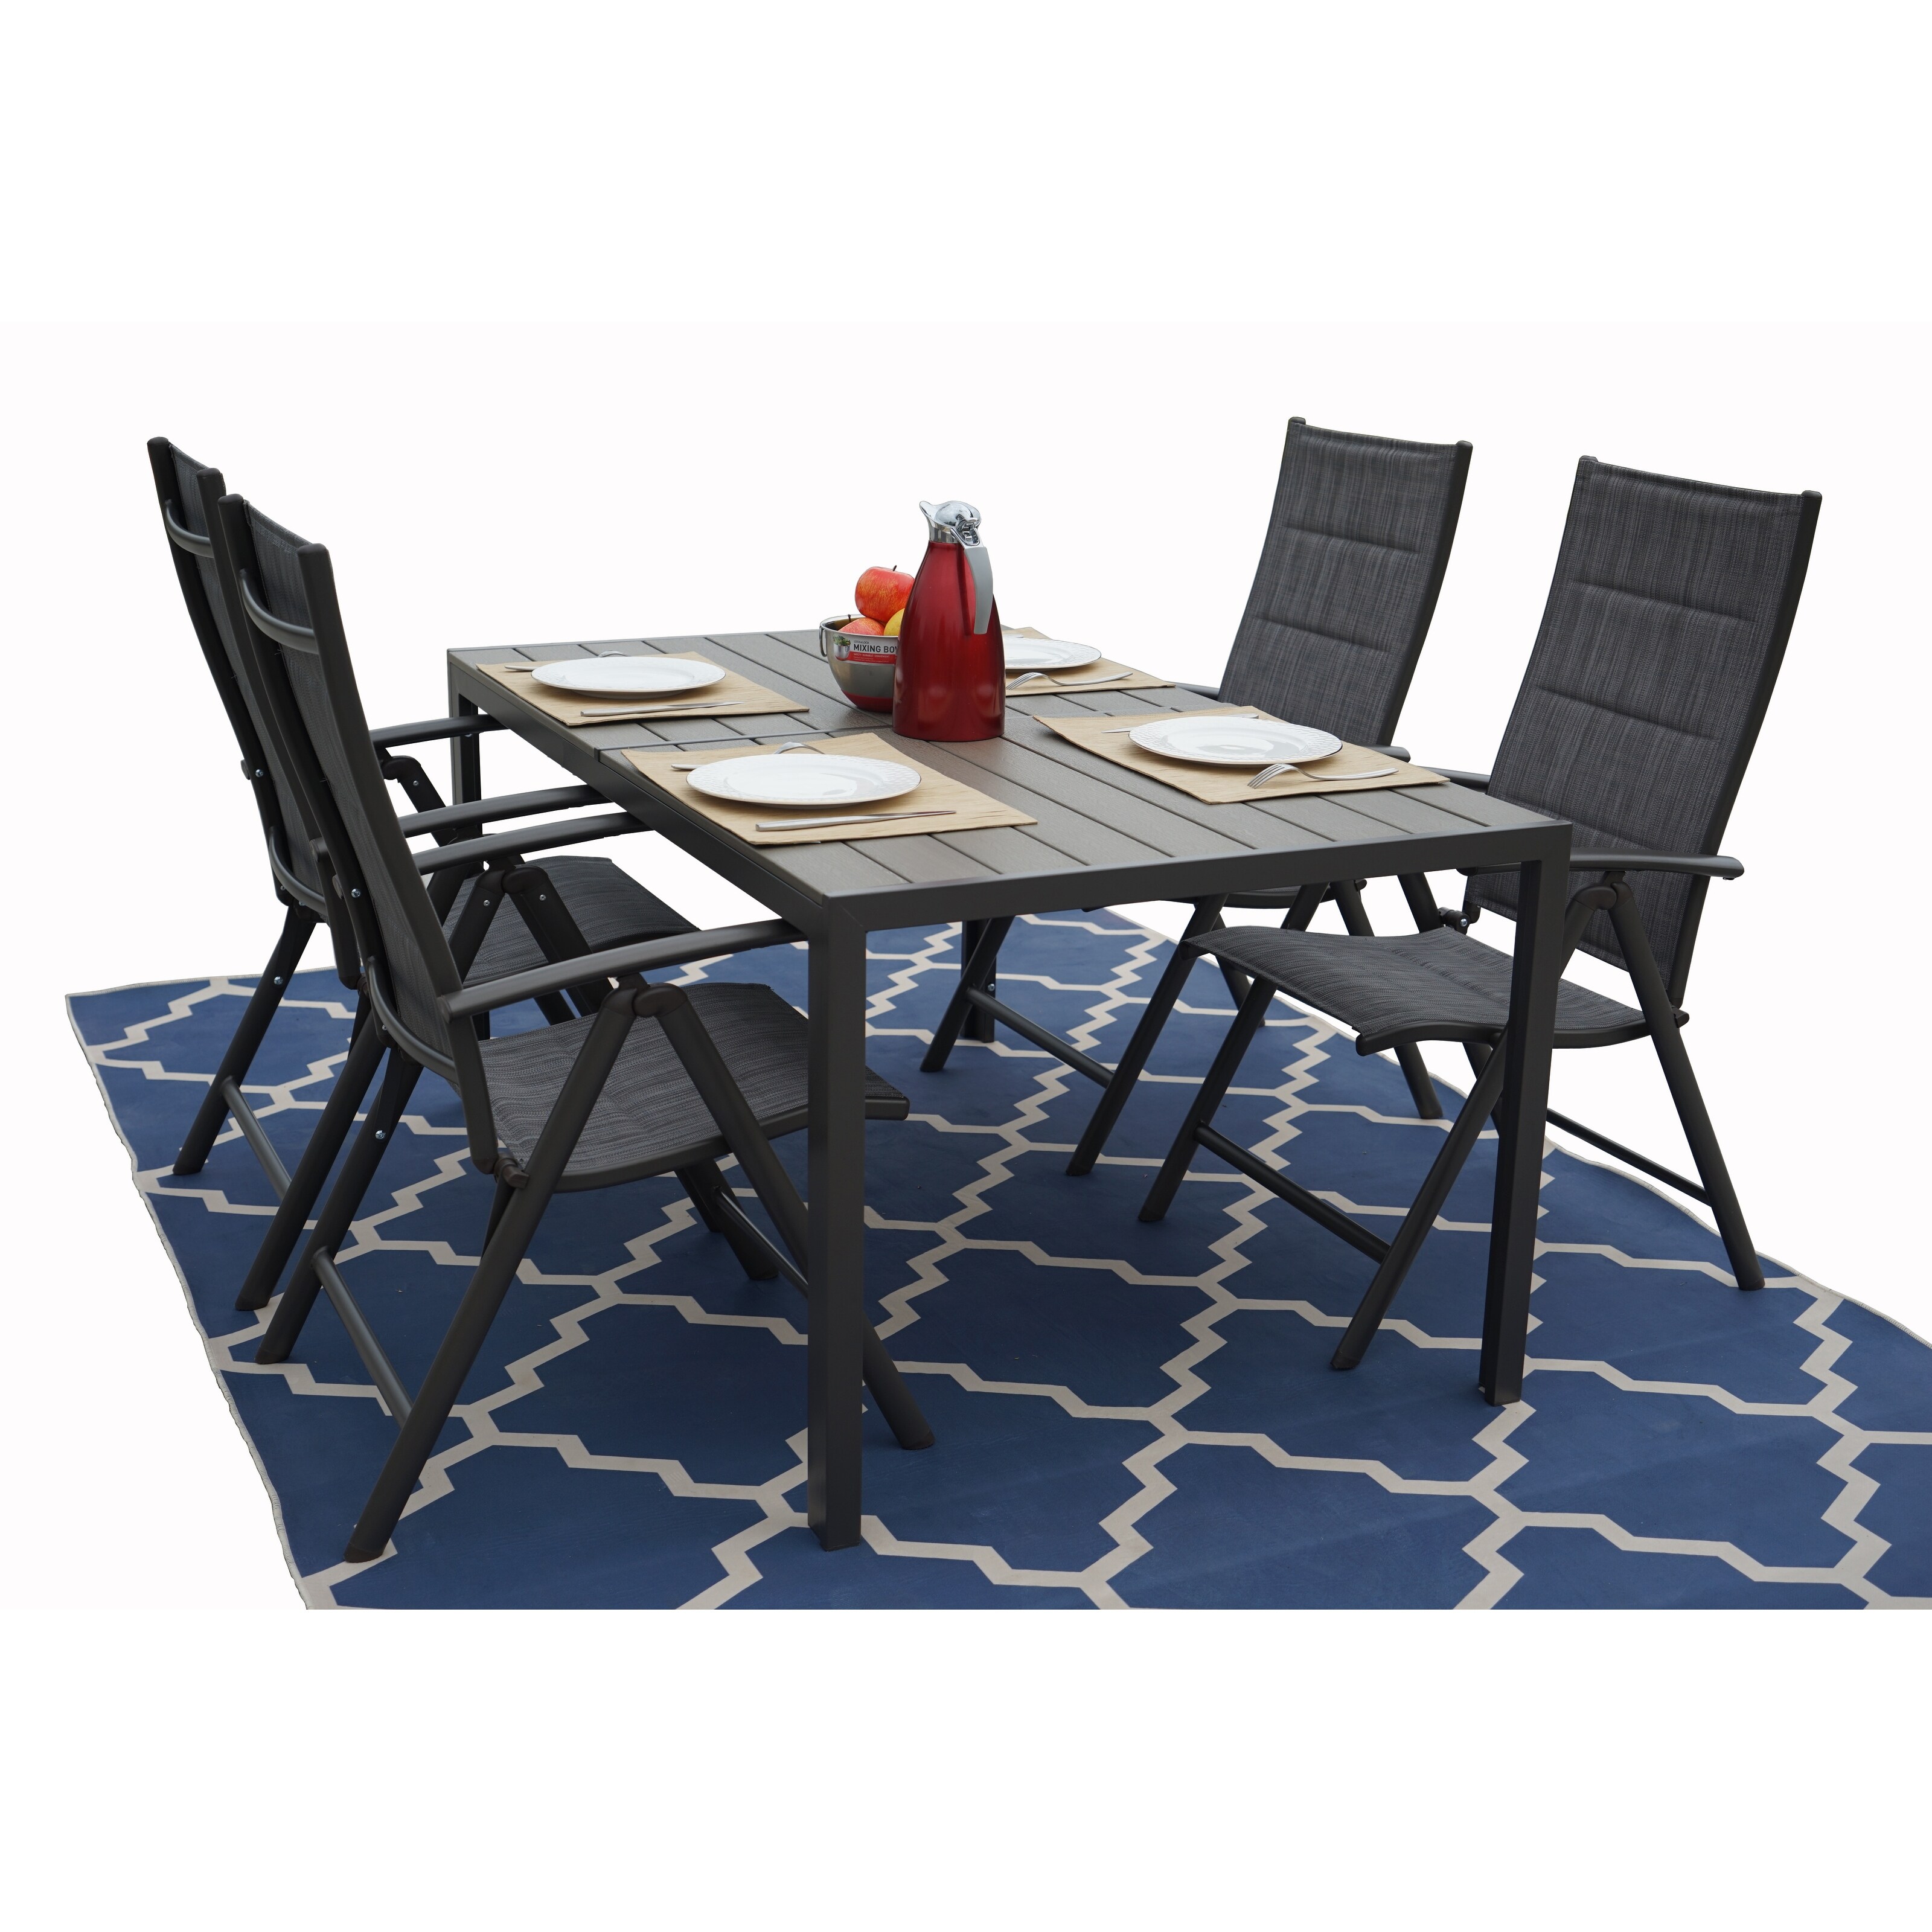 Kozyard Coolmen Outdoor Patio Dining Table with Powder-Coated Frame and Wood Like Laminate Table Top